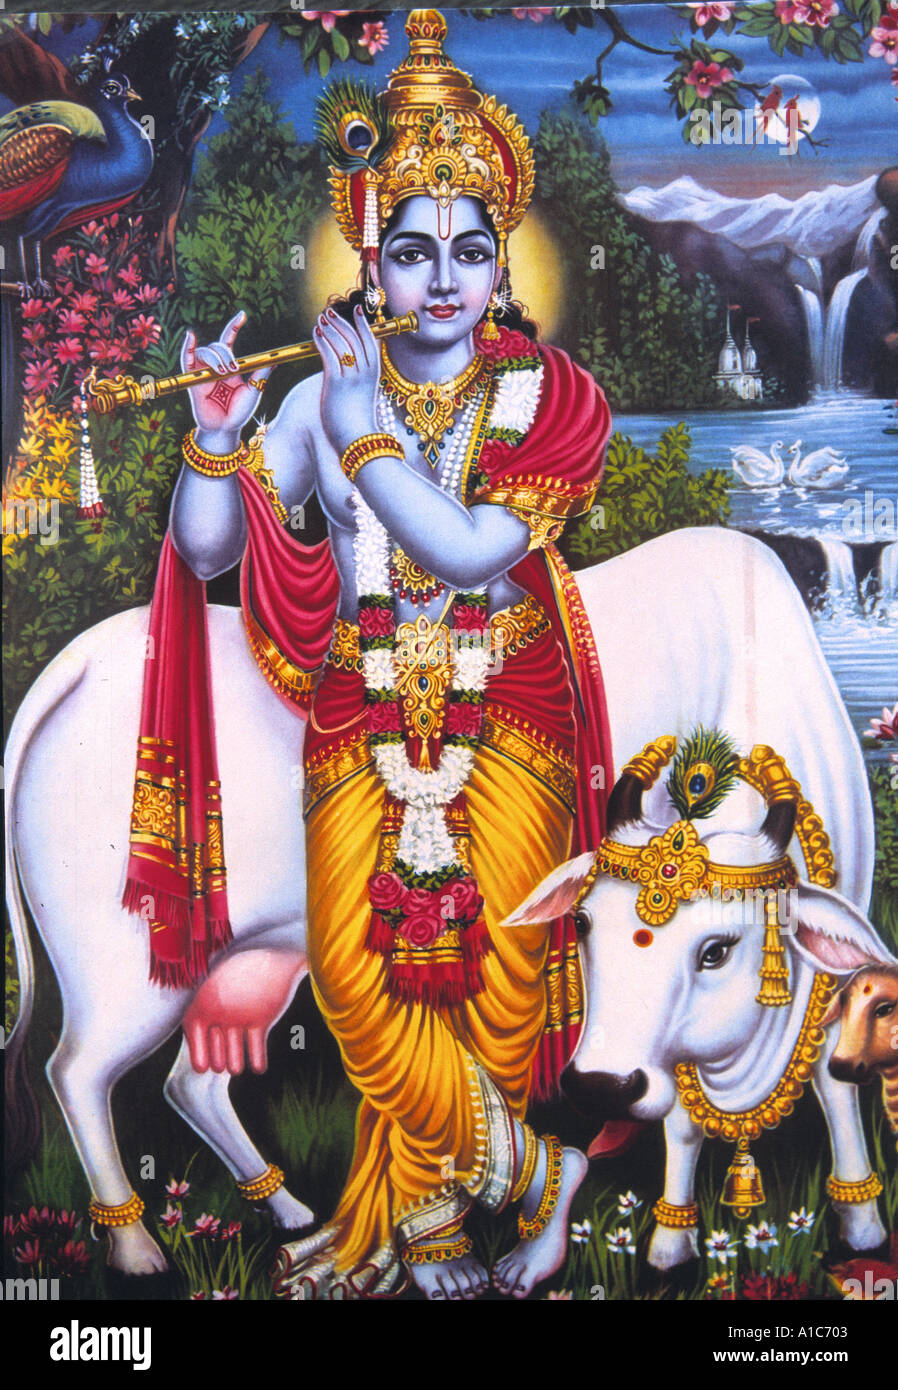 The Hindu God Krishna in a typical pose blowing his flute in the company of a sacred cow Stock Photo